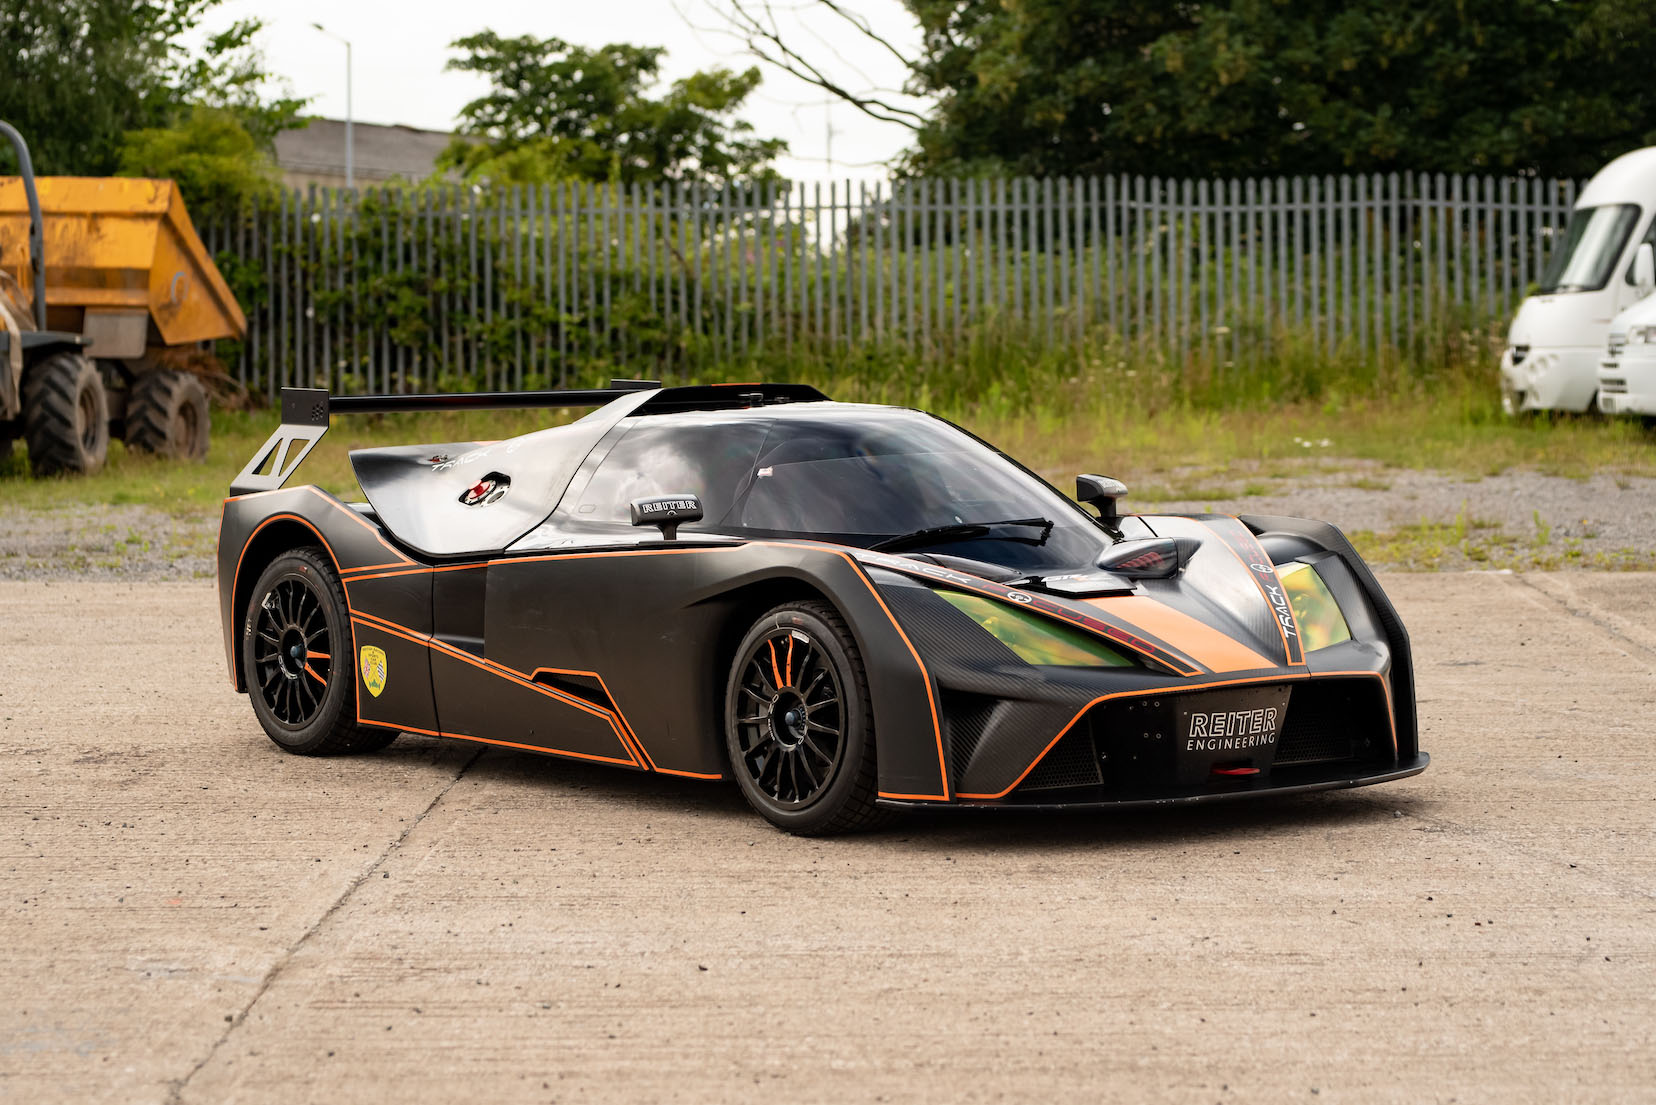 2016 KTM X-BOW GT4 for sale by auction in Chester, Cheshire 